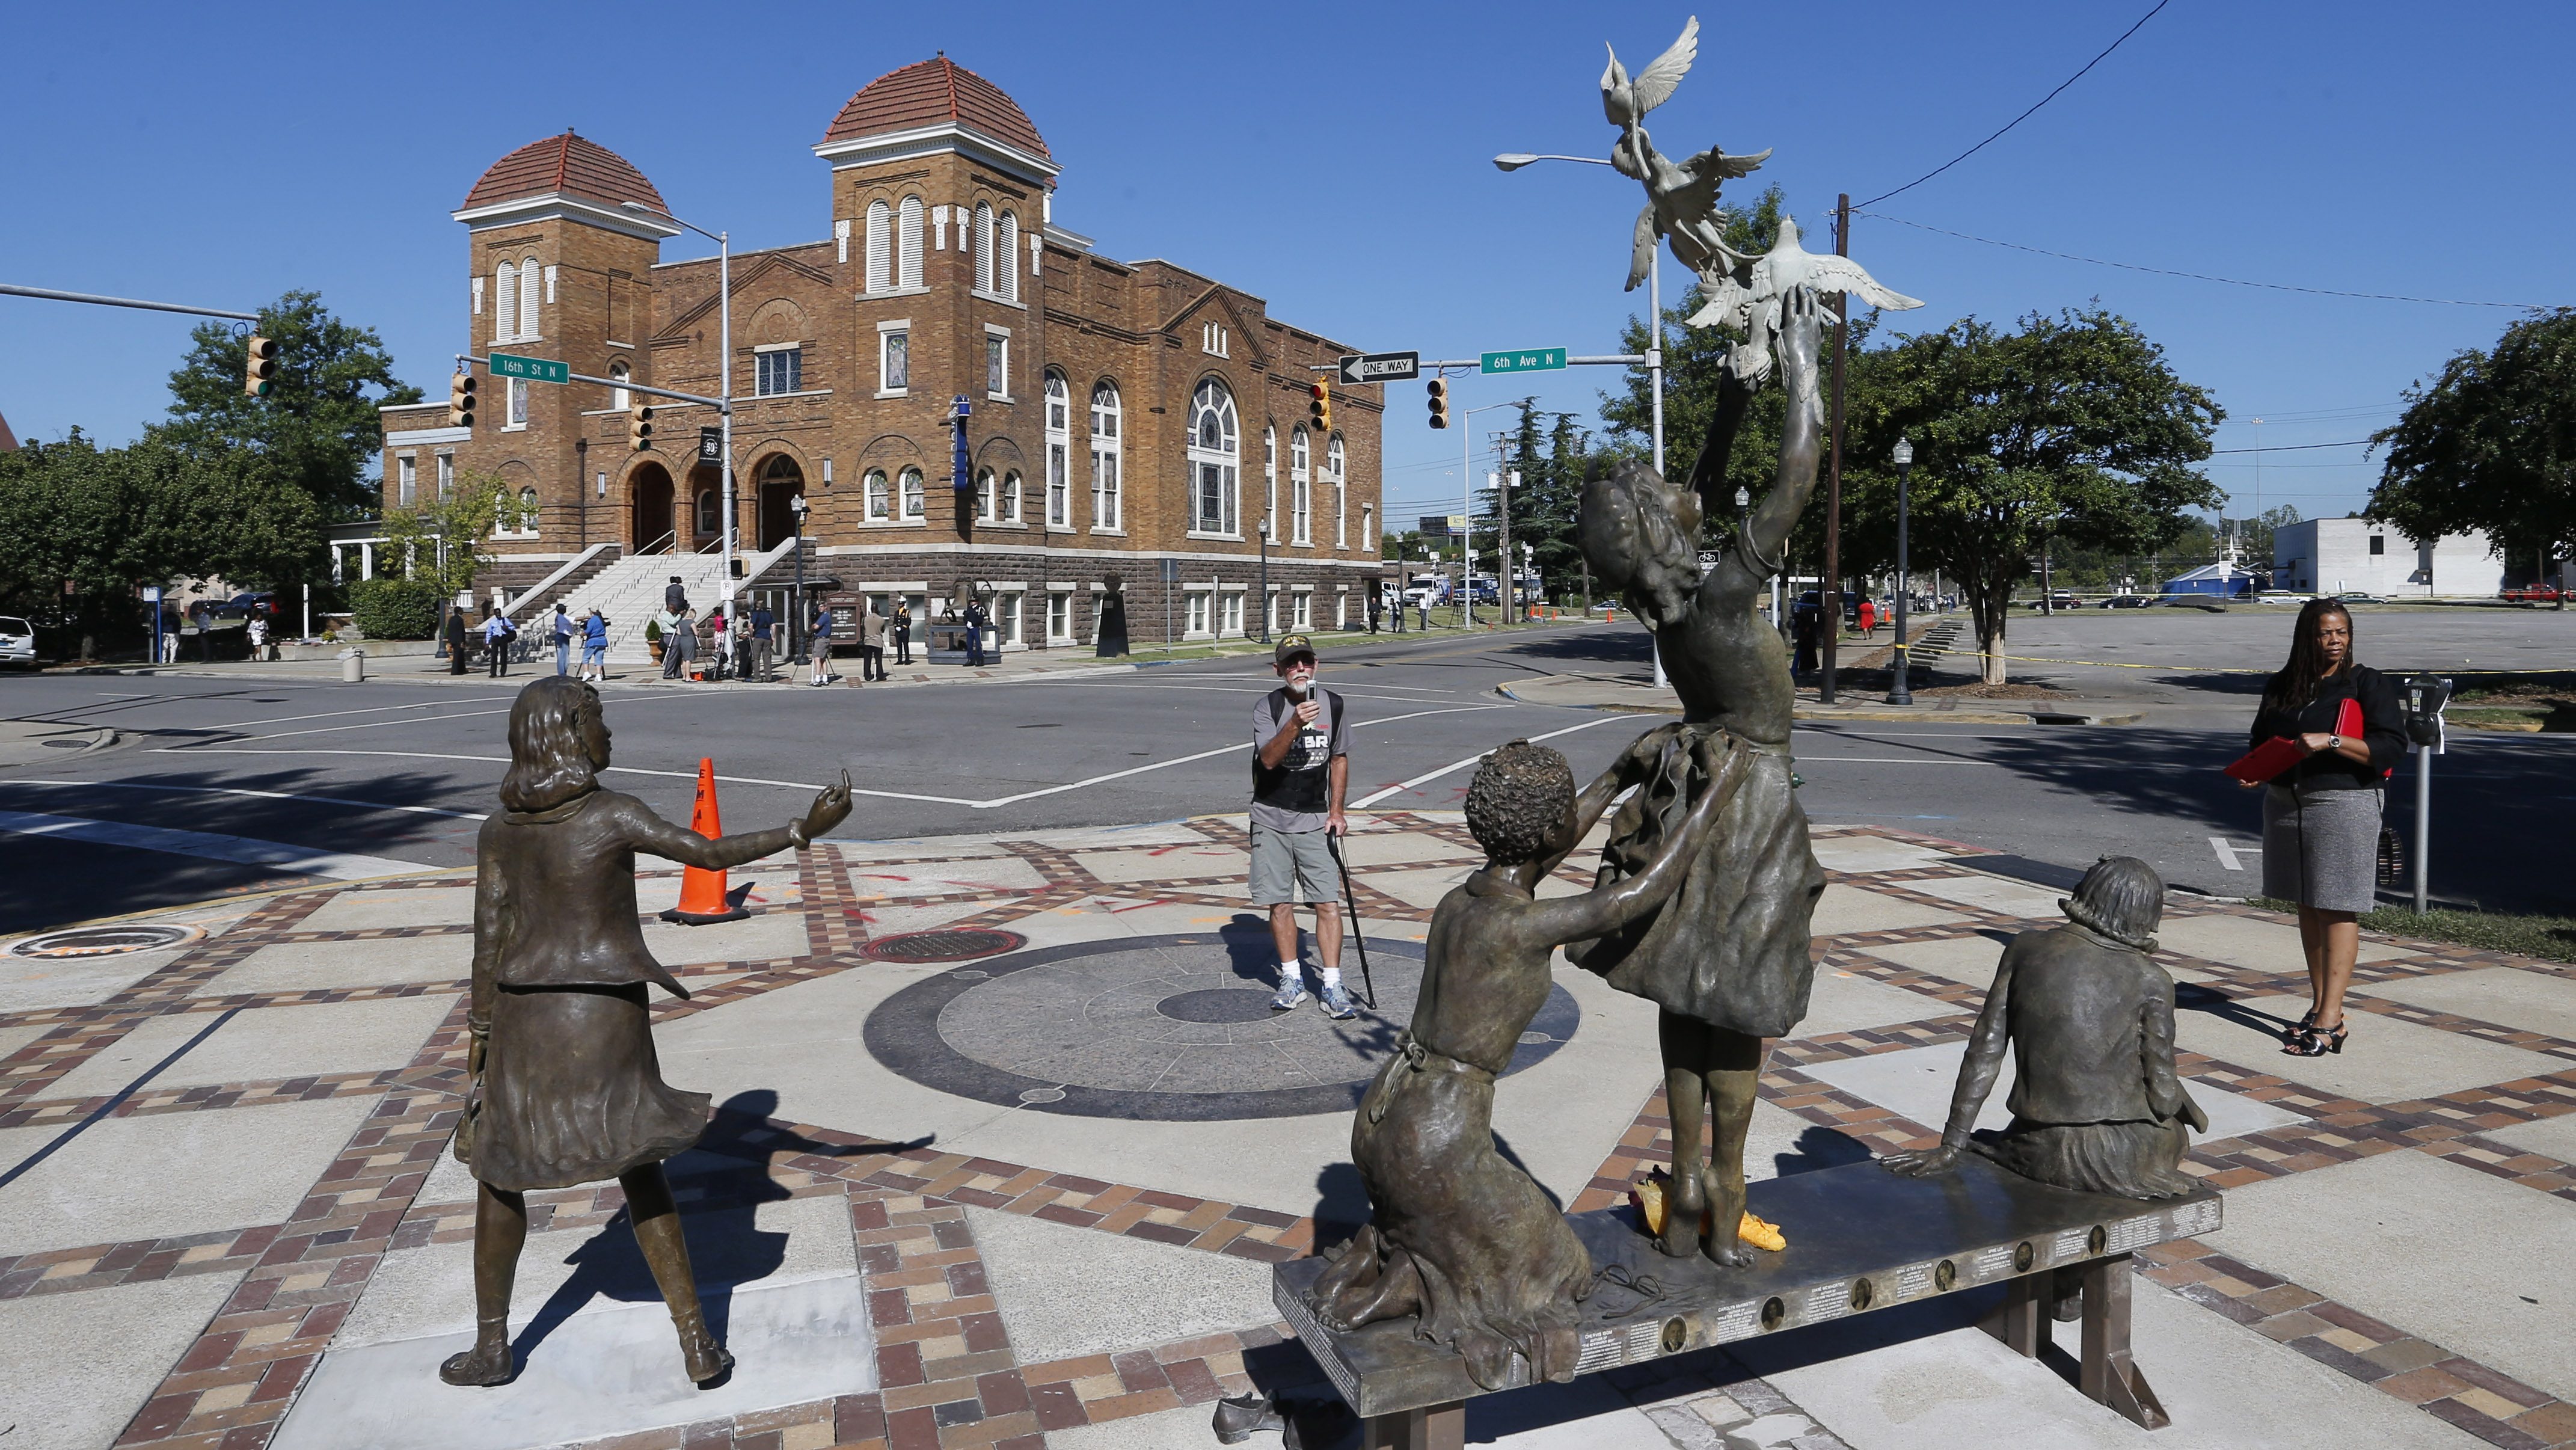 The Four Spirits statue in Birmingham’s Kelly Ingram Park memorializes the victims of the 16th Street Baptist Church bombing — Denise McNair, Carole Robertson, Addie Mae Collins and Cynthia Wesley